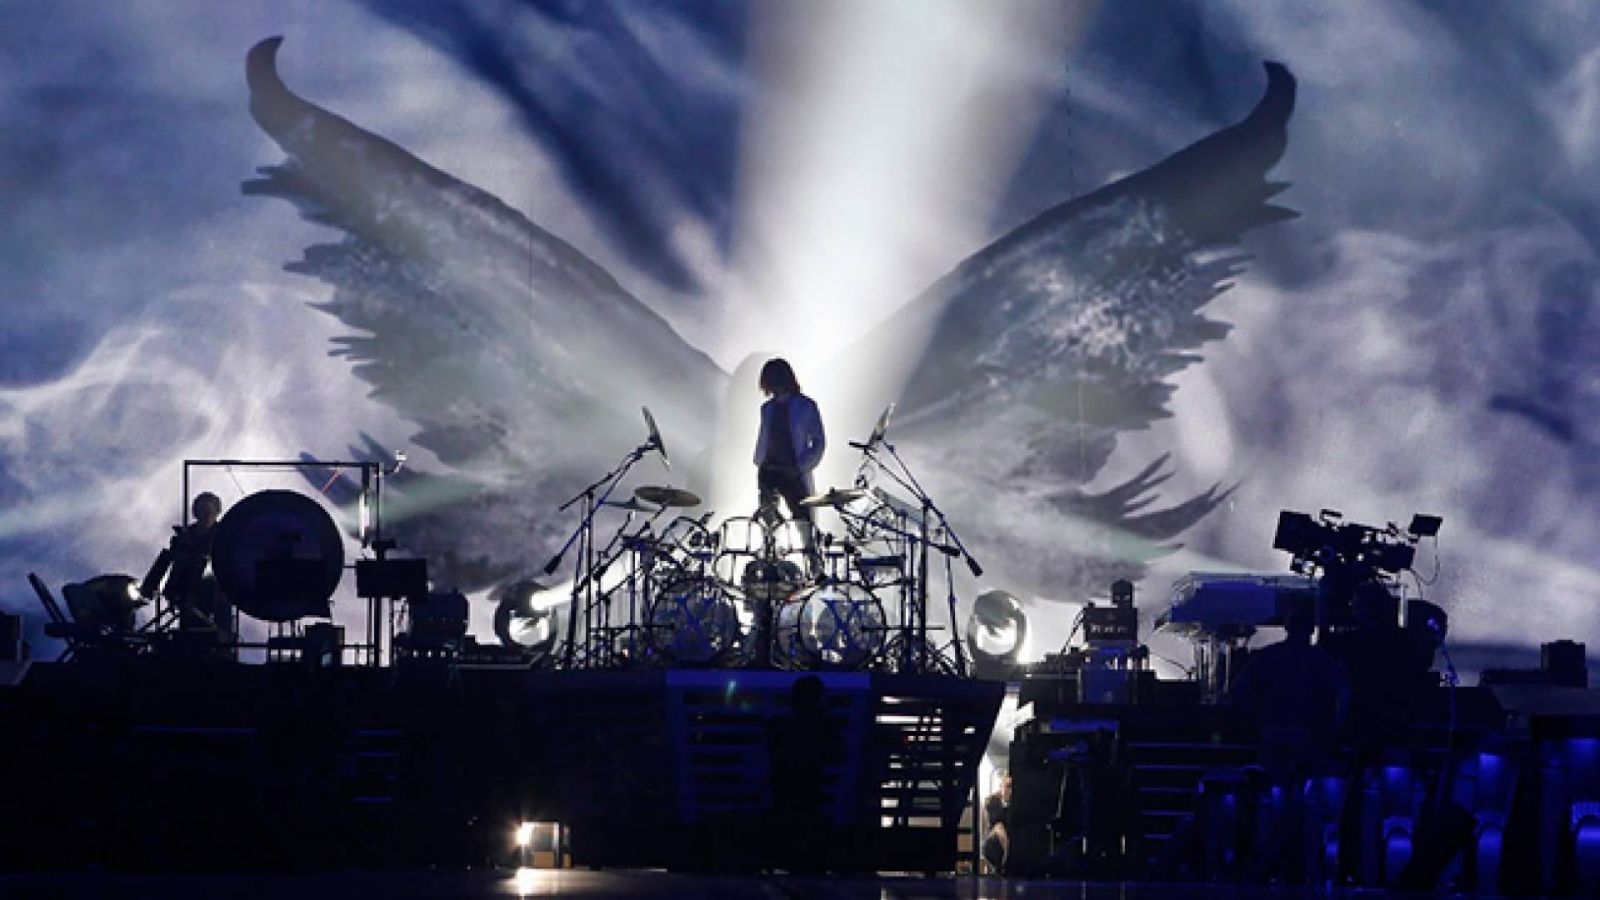 X JAPAN - "We Are X" Film Review © X JAPAN